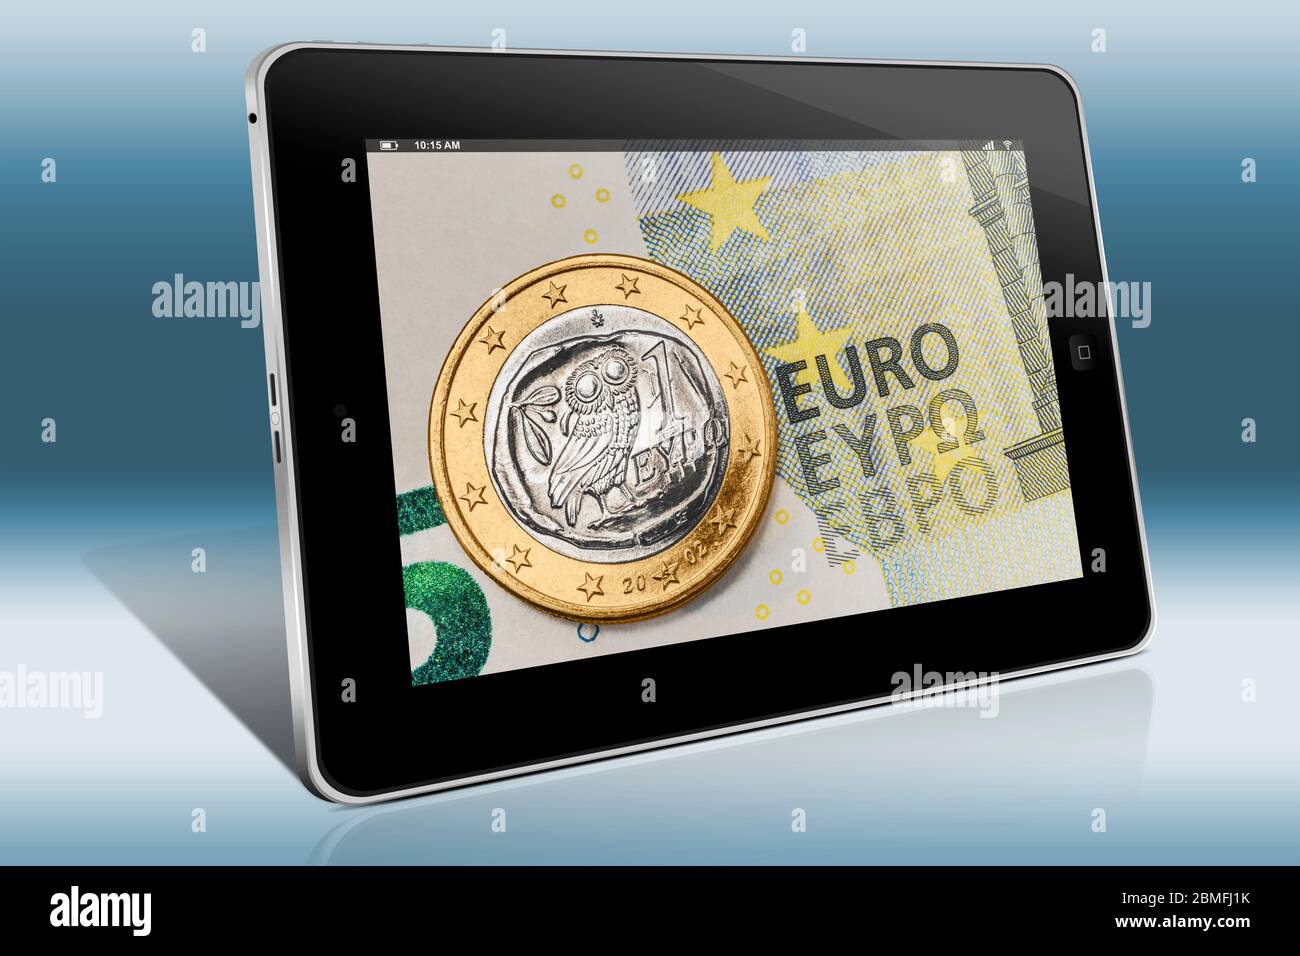 a 1 euro coin from Greece on a 5 euro banknote, view on a Tablet PC Stock Photo